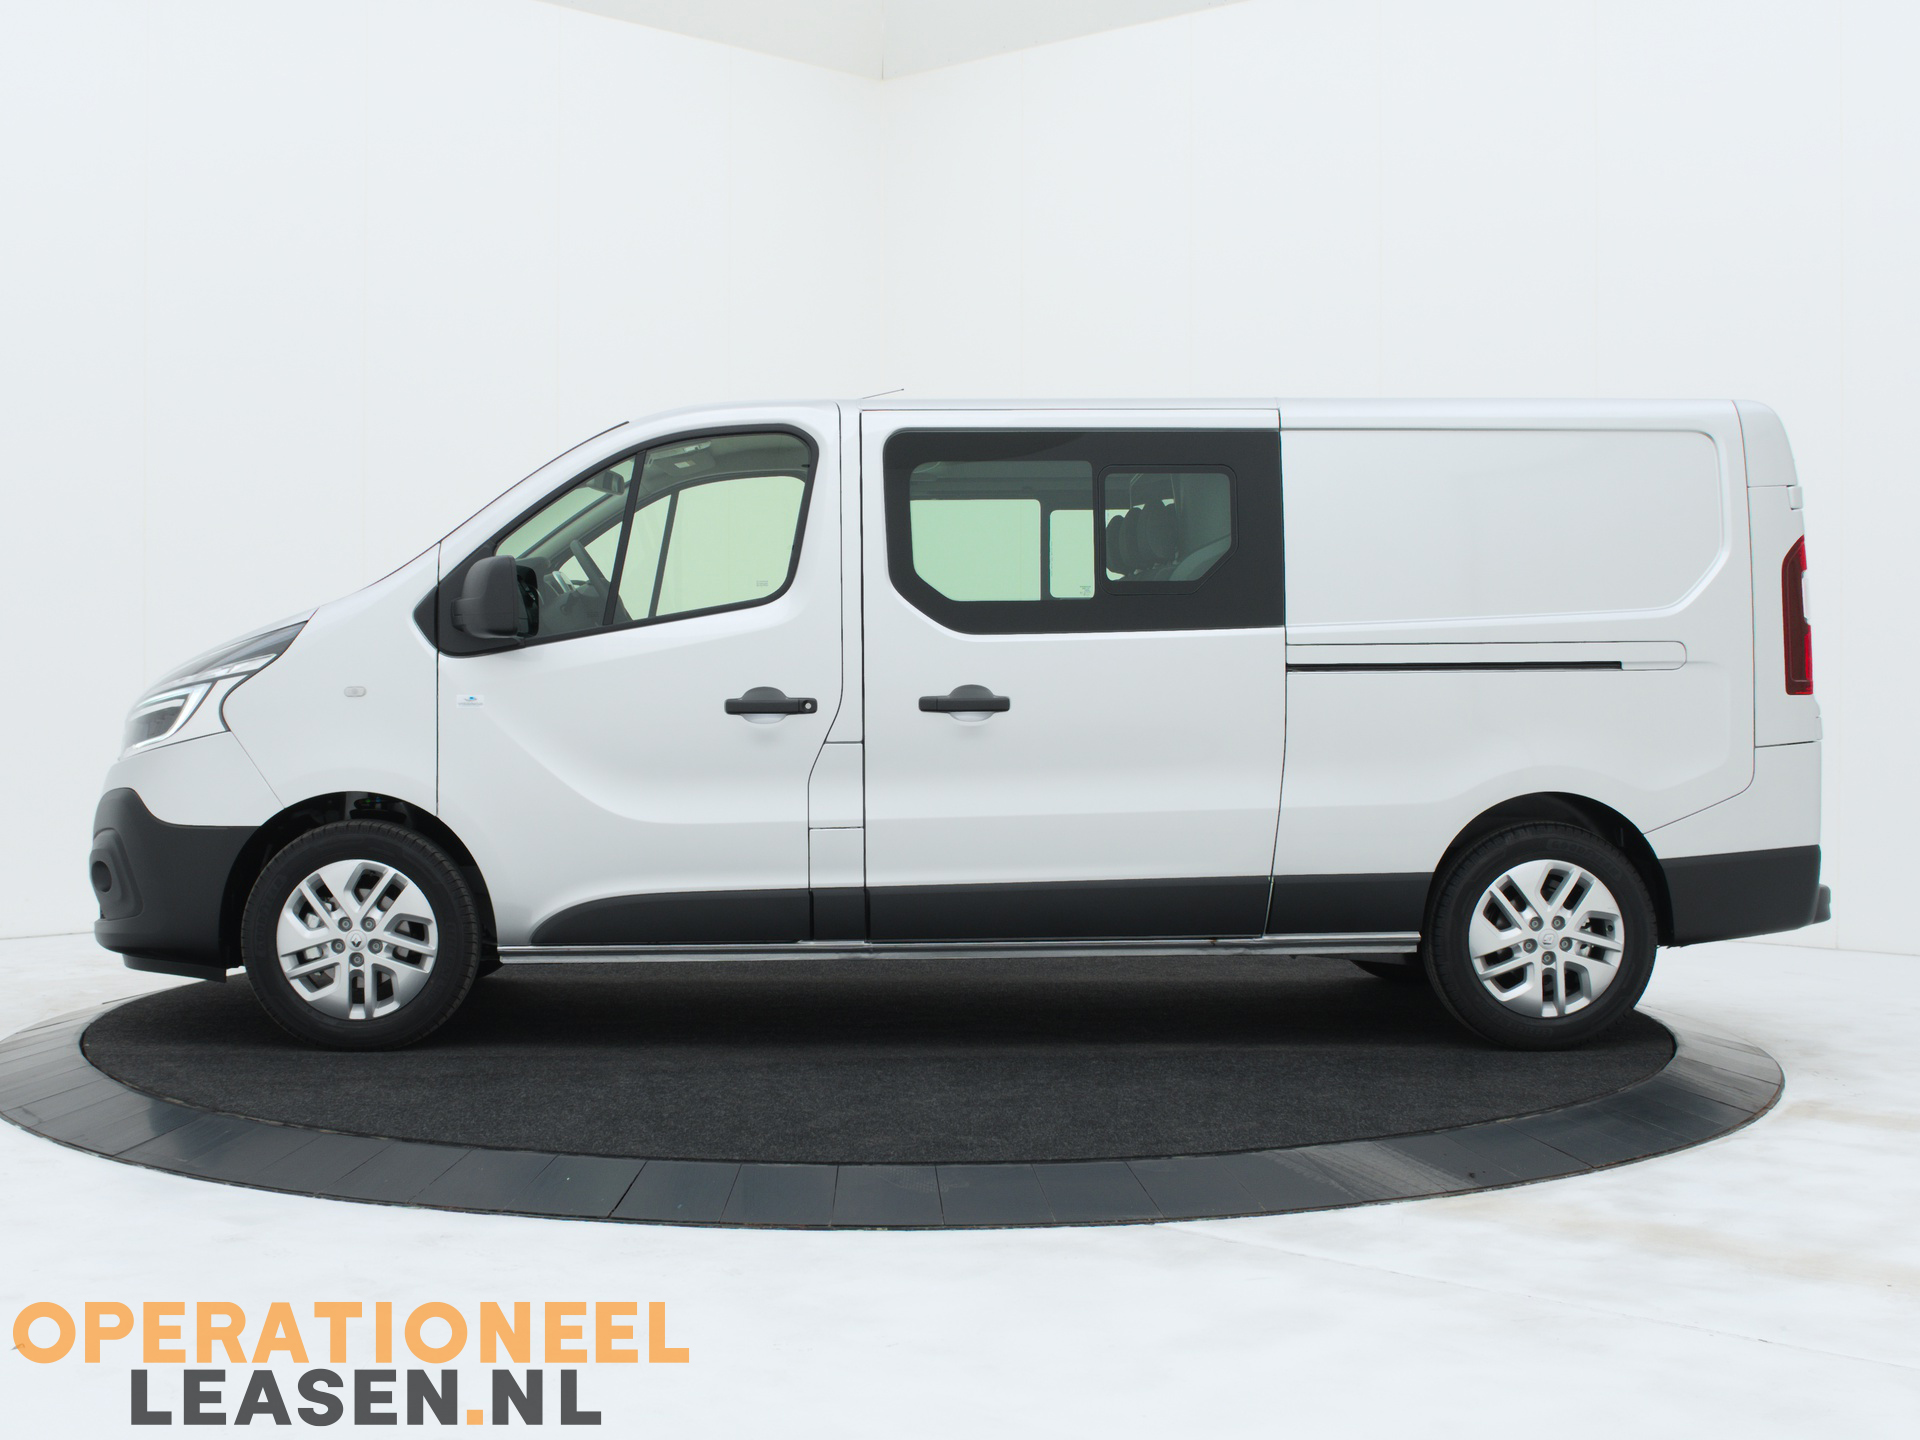 Operational lease Renault master traffic-12